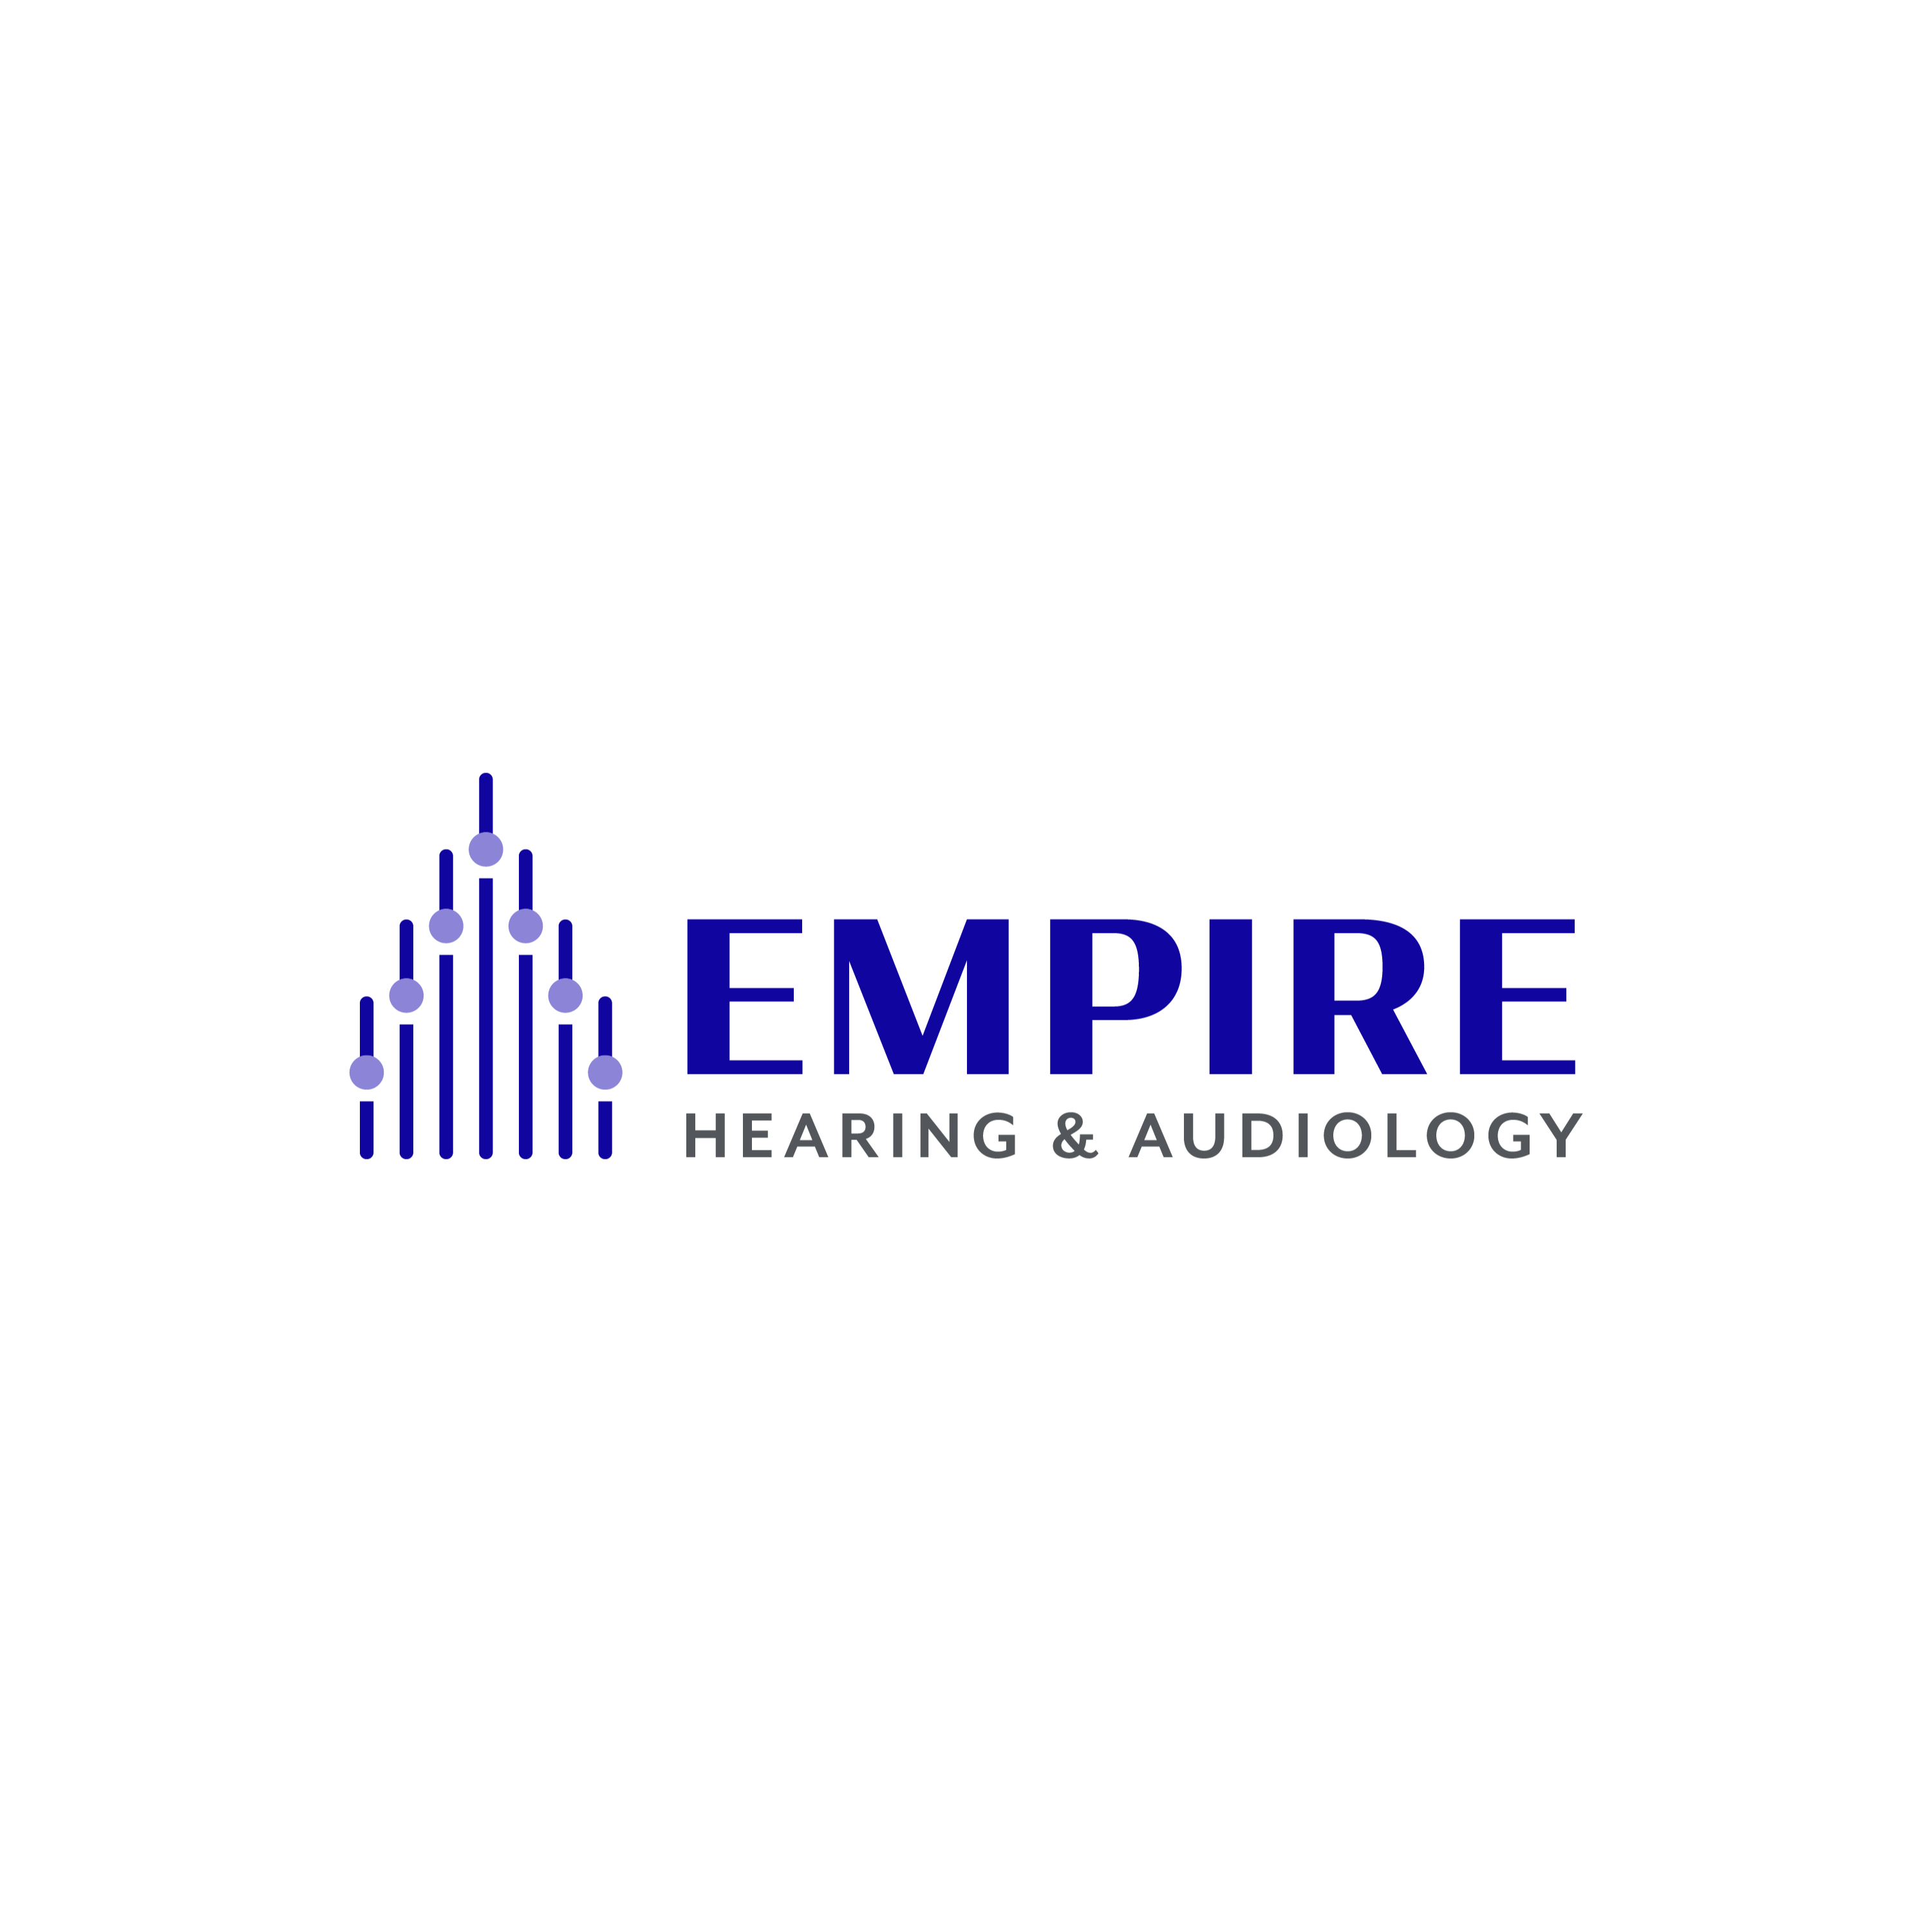 Empire Hearing & Audiology - Penfield - Penfield, NY 14526 - (585)421-7039 | ShowMeLocal.com